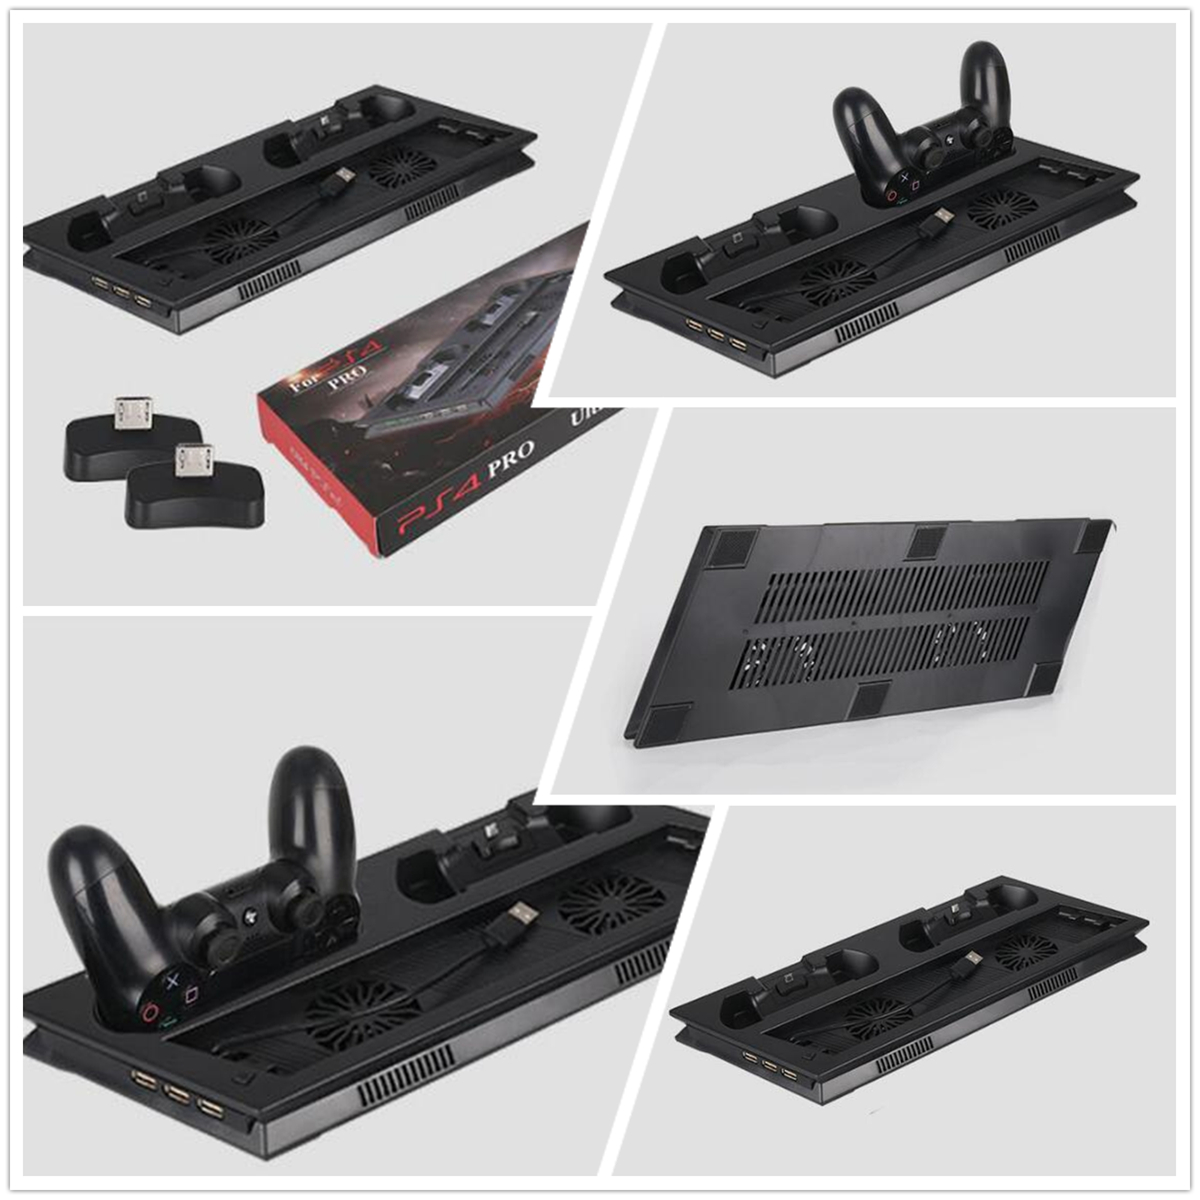 LED Charger Station Stand Charging Dock Cooling Fan for Sony Playstation 4 PS4 PRO Slim Game Console Gamepad 34